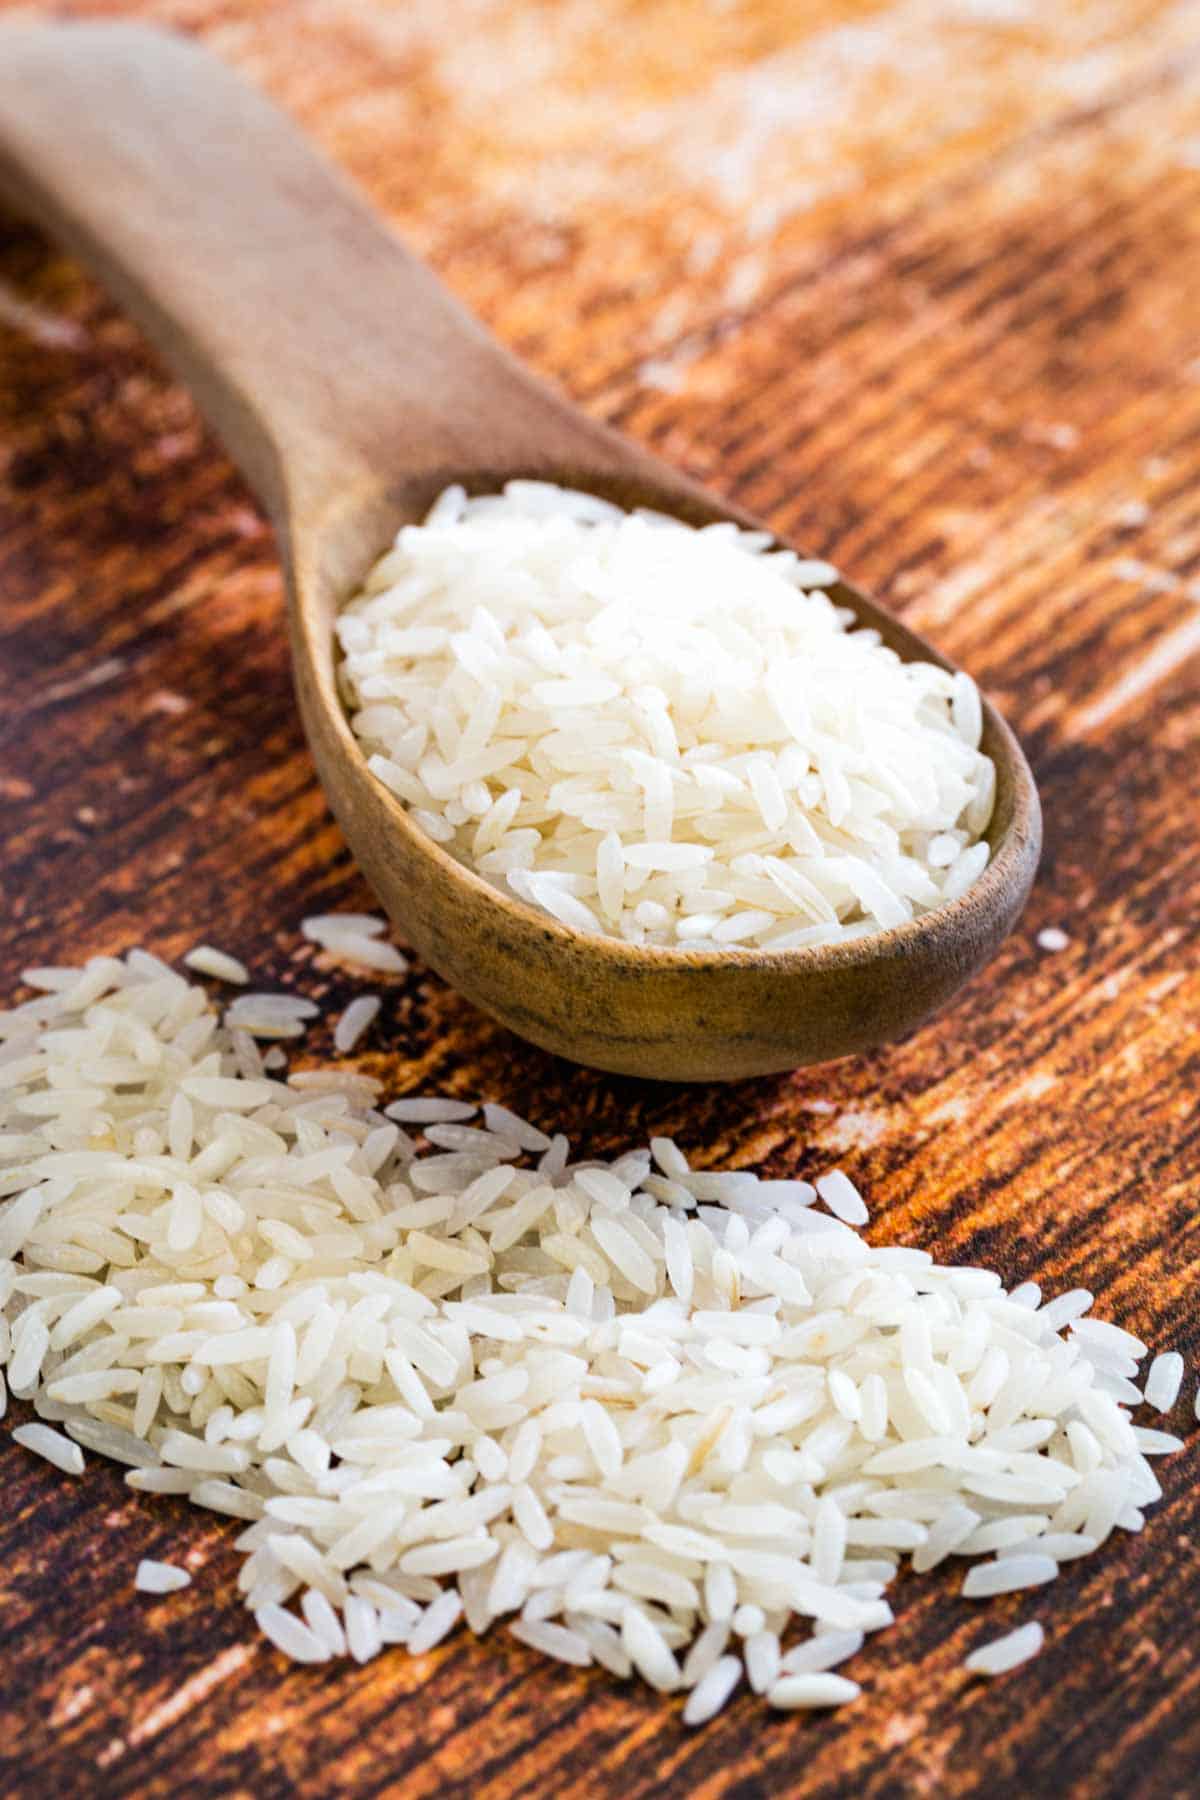 A large wooden spoonful of jasmine rice on a wooden countertop, with scattered rice grains.